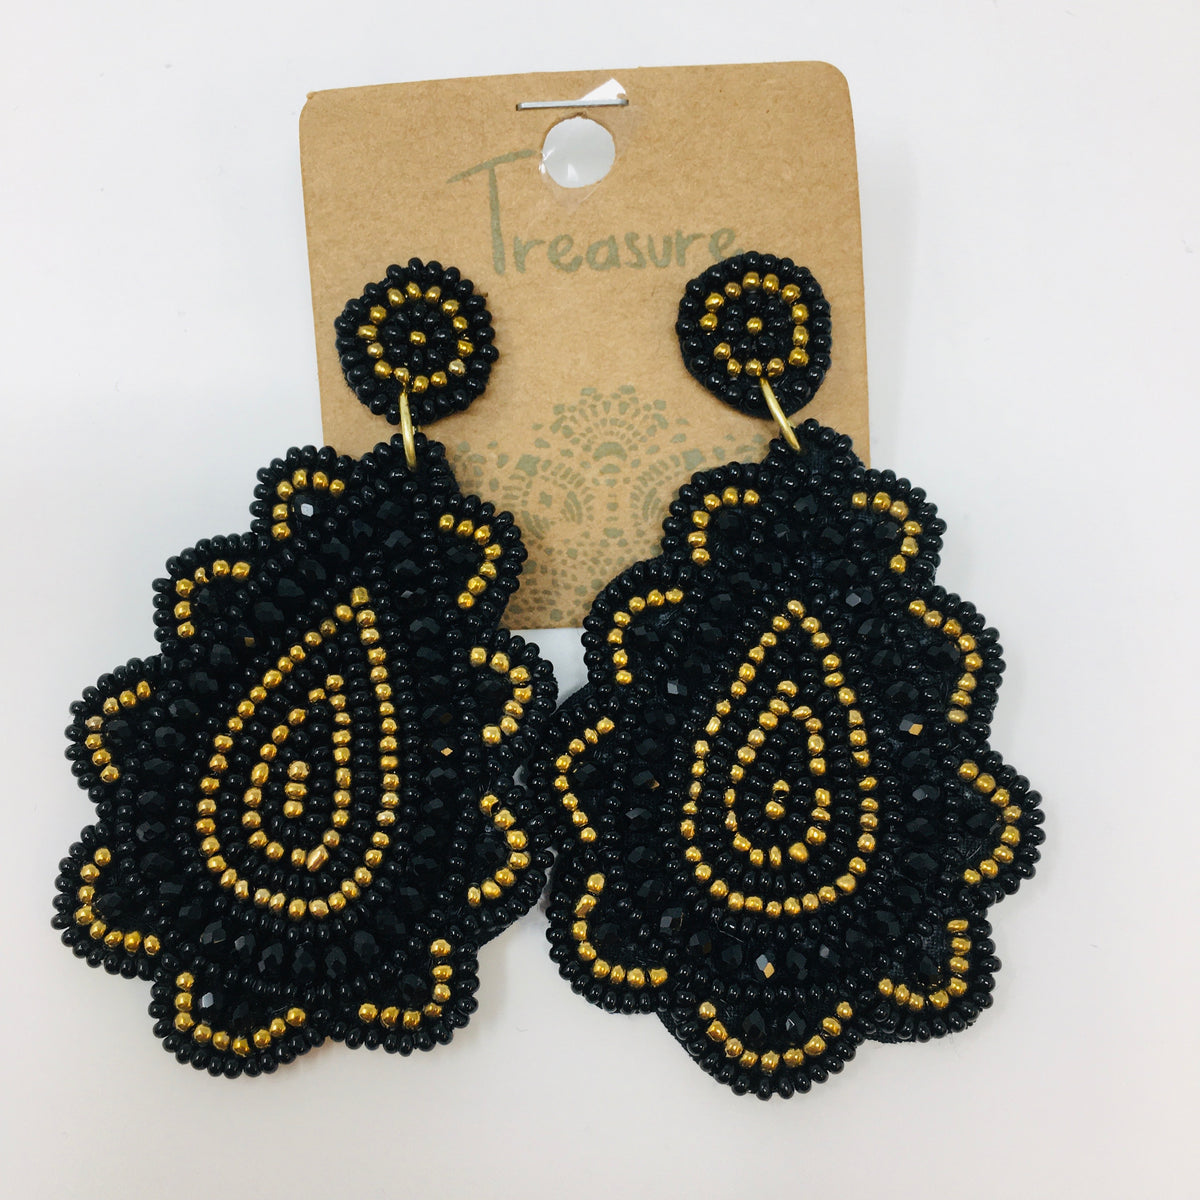 Scalloped teardrop shaped earrings with black &amp; gold colored seed beads shown on white background